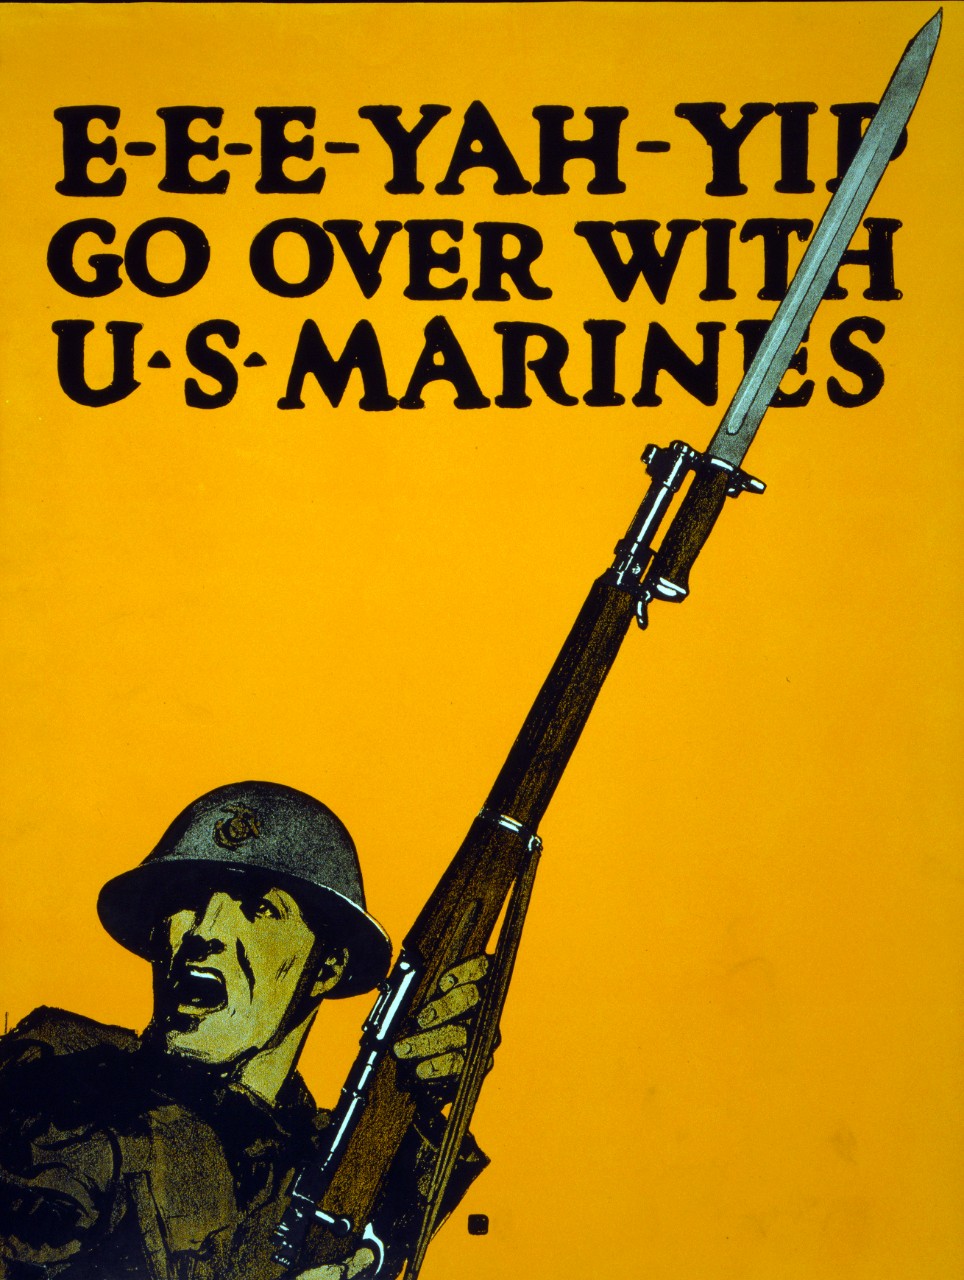 <p>LC-USZC4-10037: WWI-Recruiting Poster: Marines. “E-e-e-yah-yip. Go Over With The Marines.” Artwork by Charles B. Falls, 1917.&nbsp;</p>
